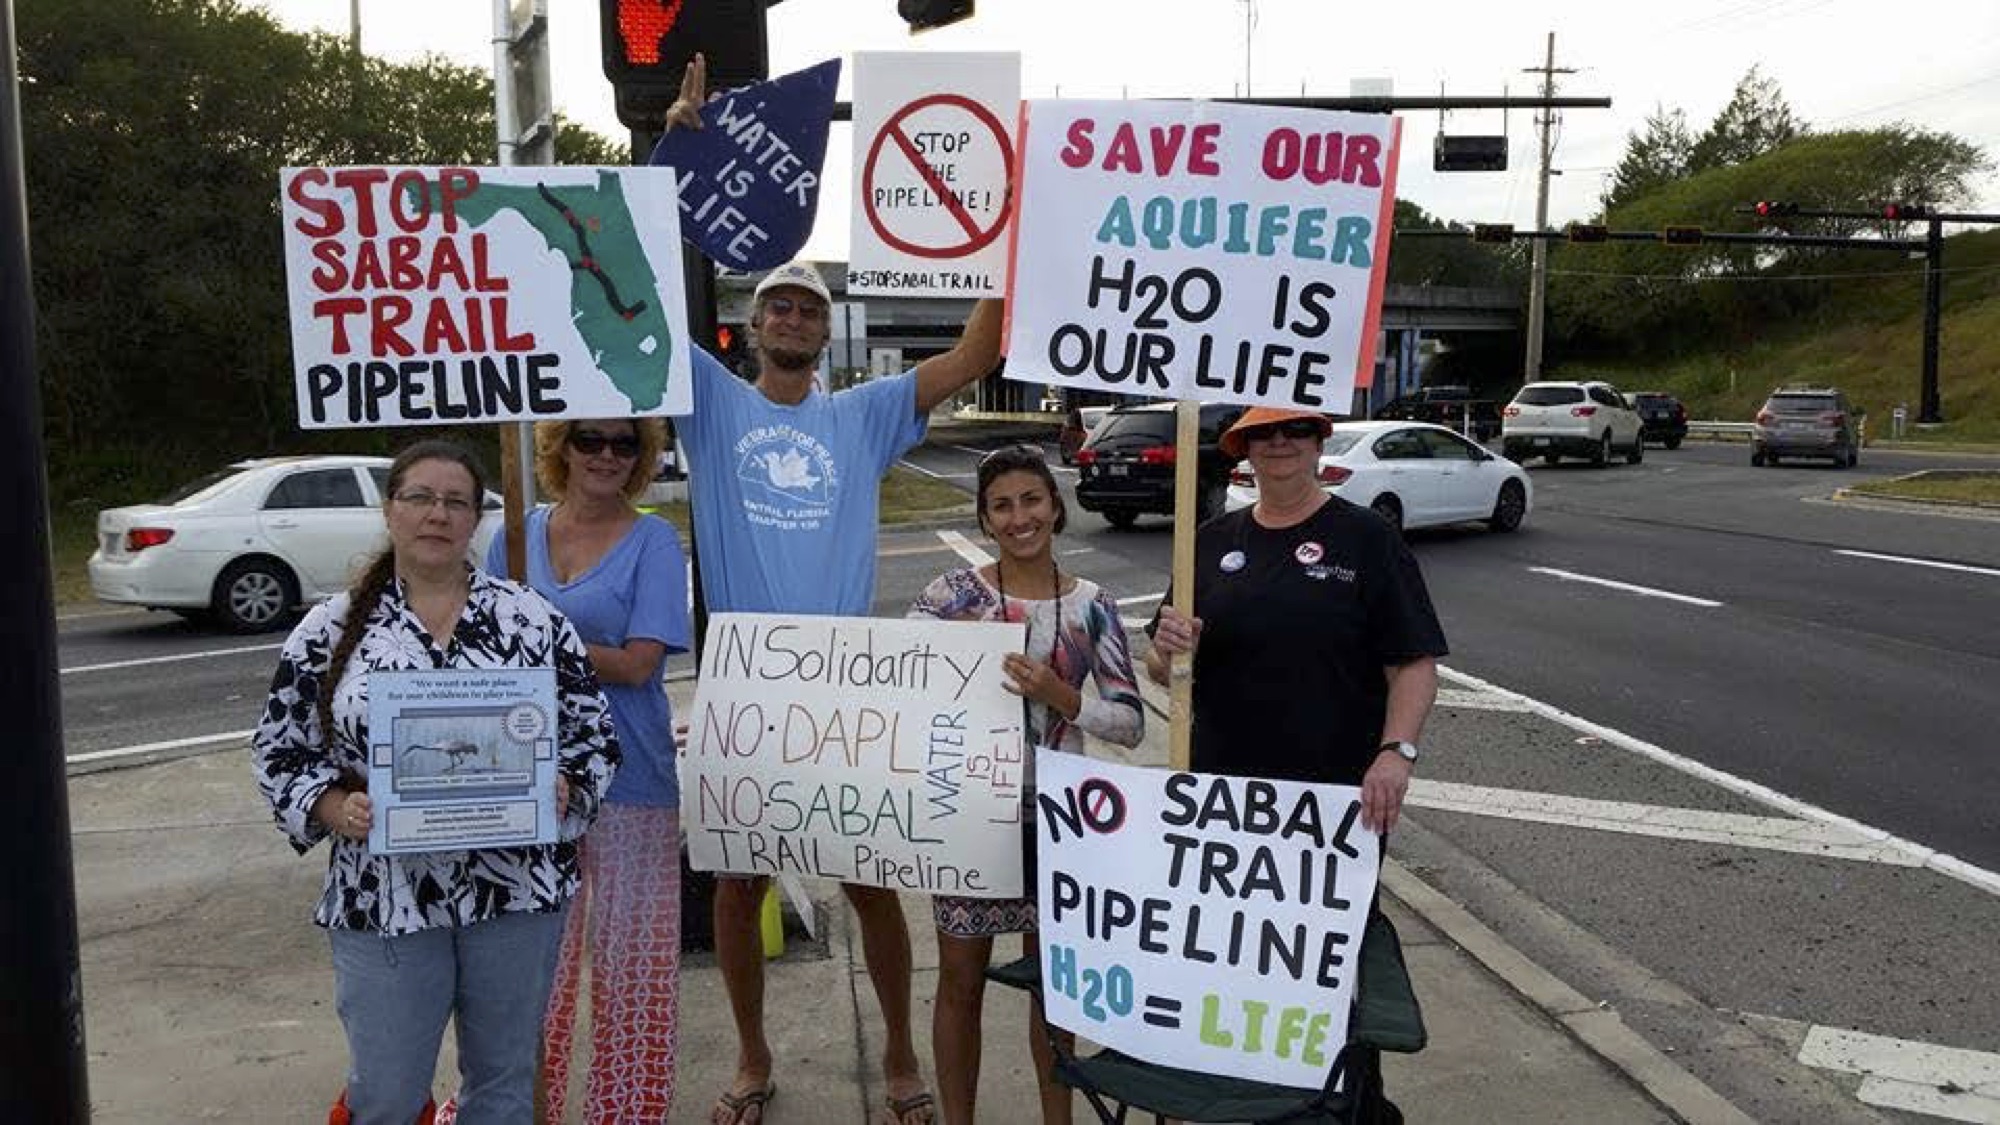 Protesters against the Sabal Trail pipeline demonstrate in Gainesville, Florida